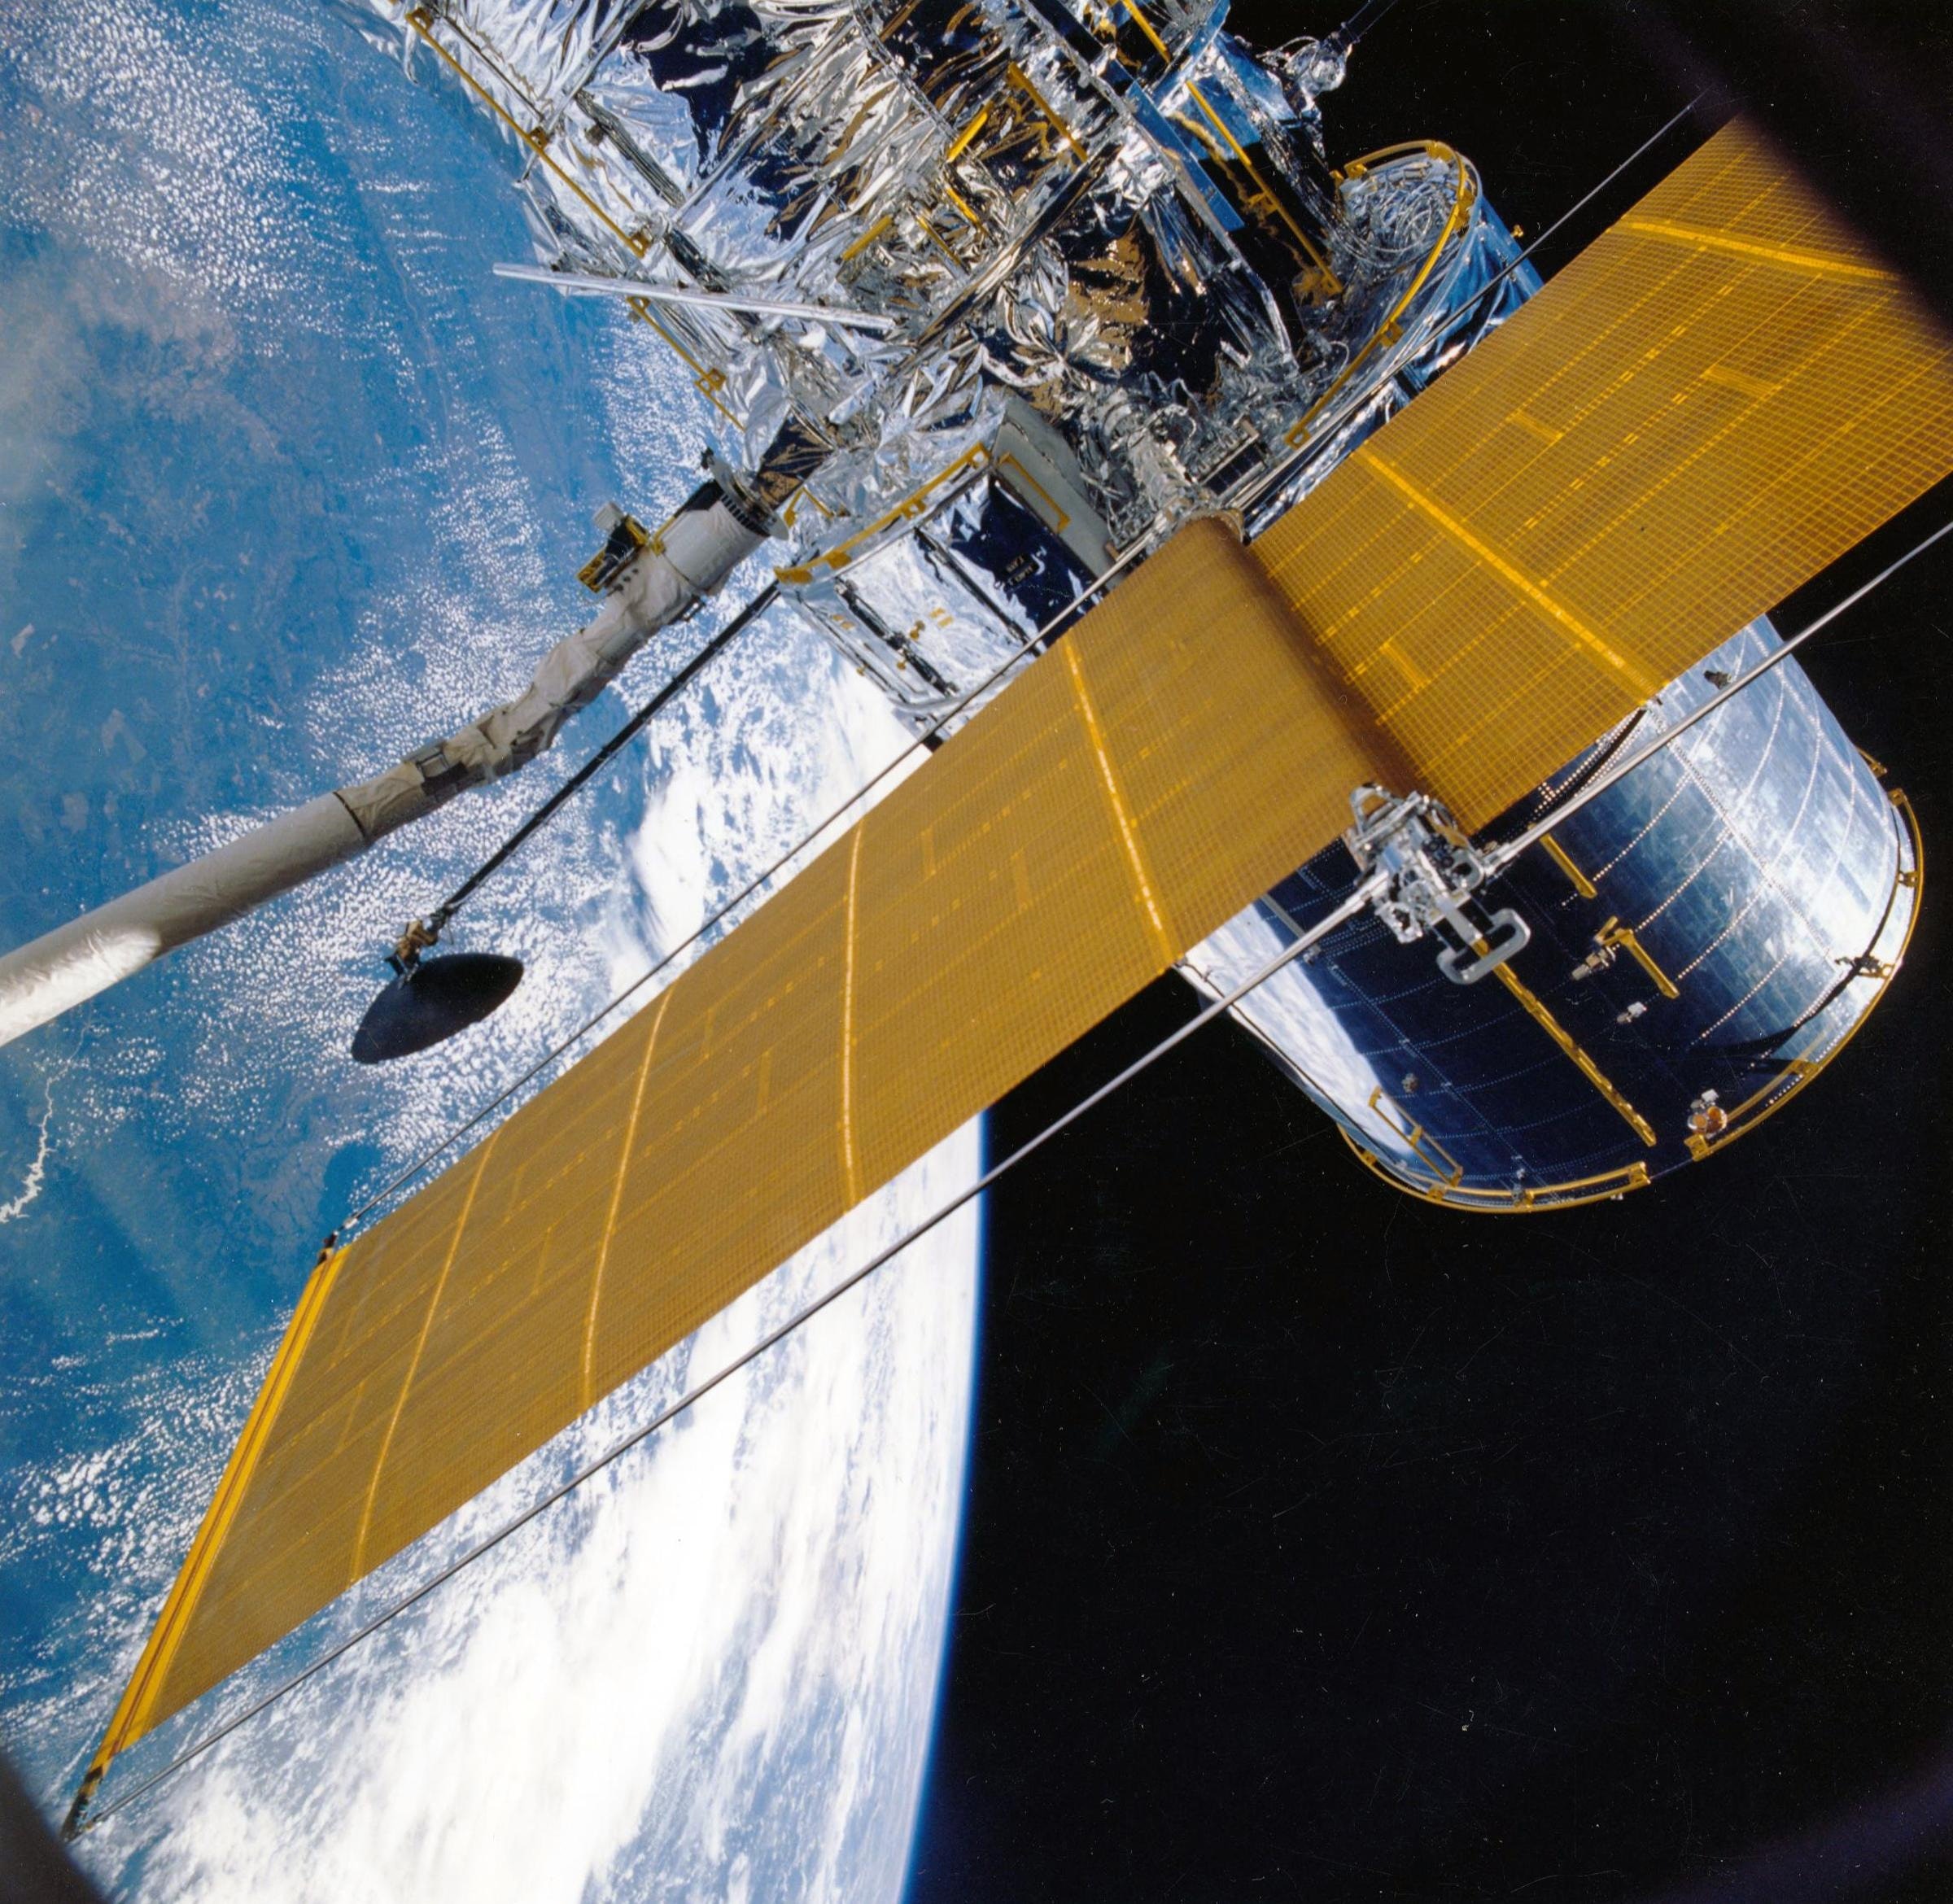 Partial view of a satellite in space. Pictured is part of the hull, a solar panel array and the Earth in the background.